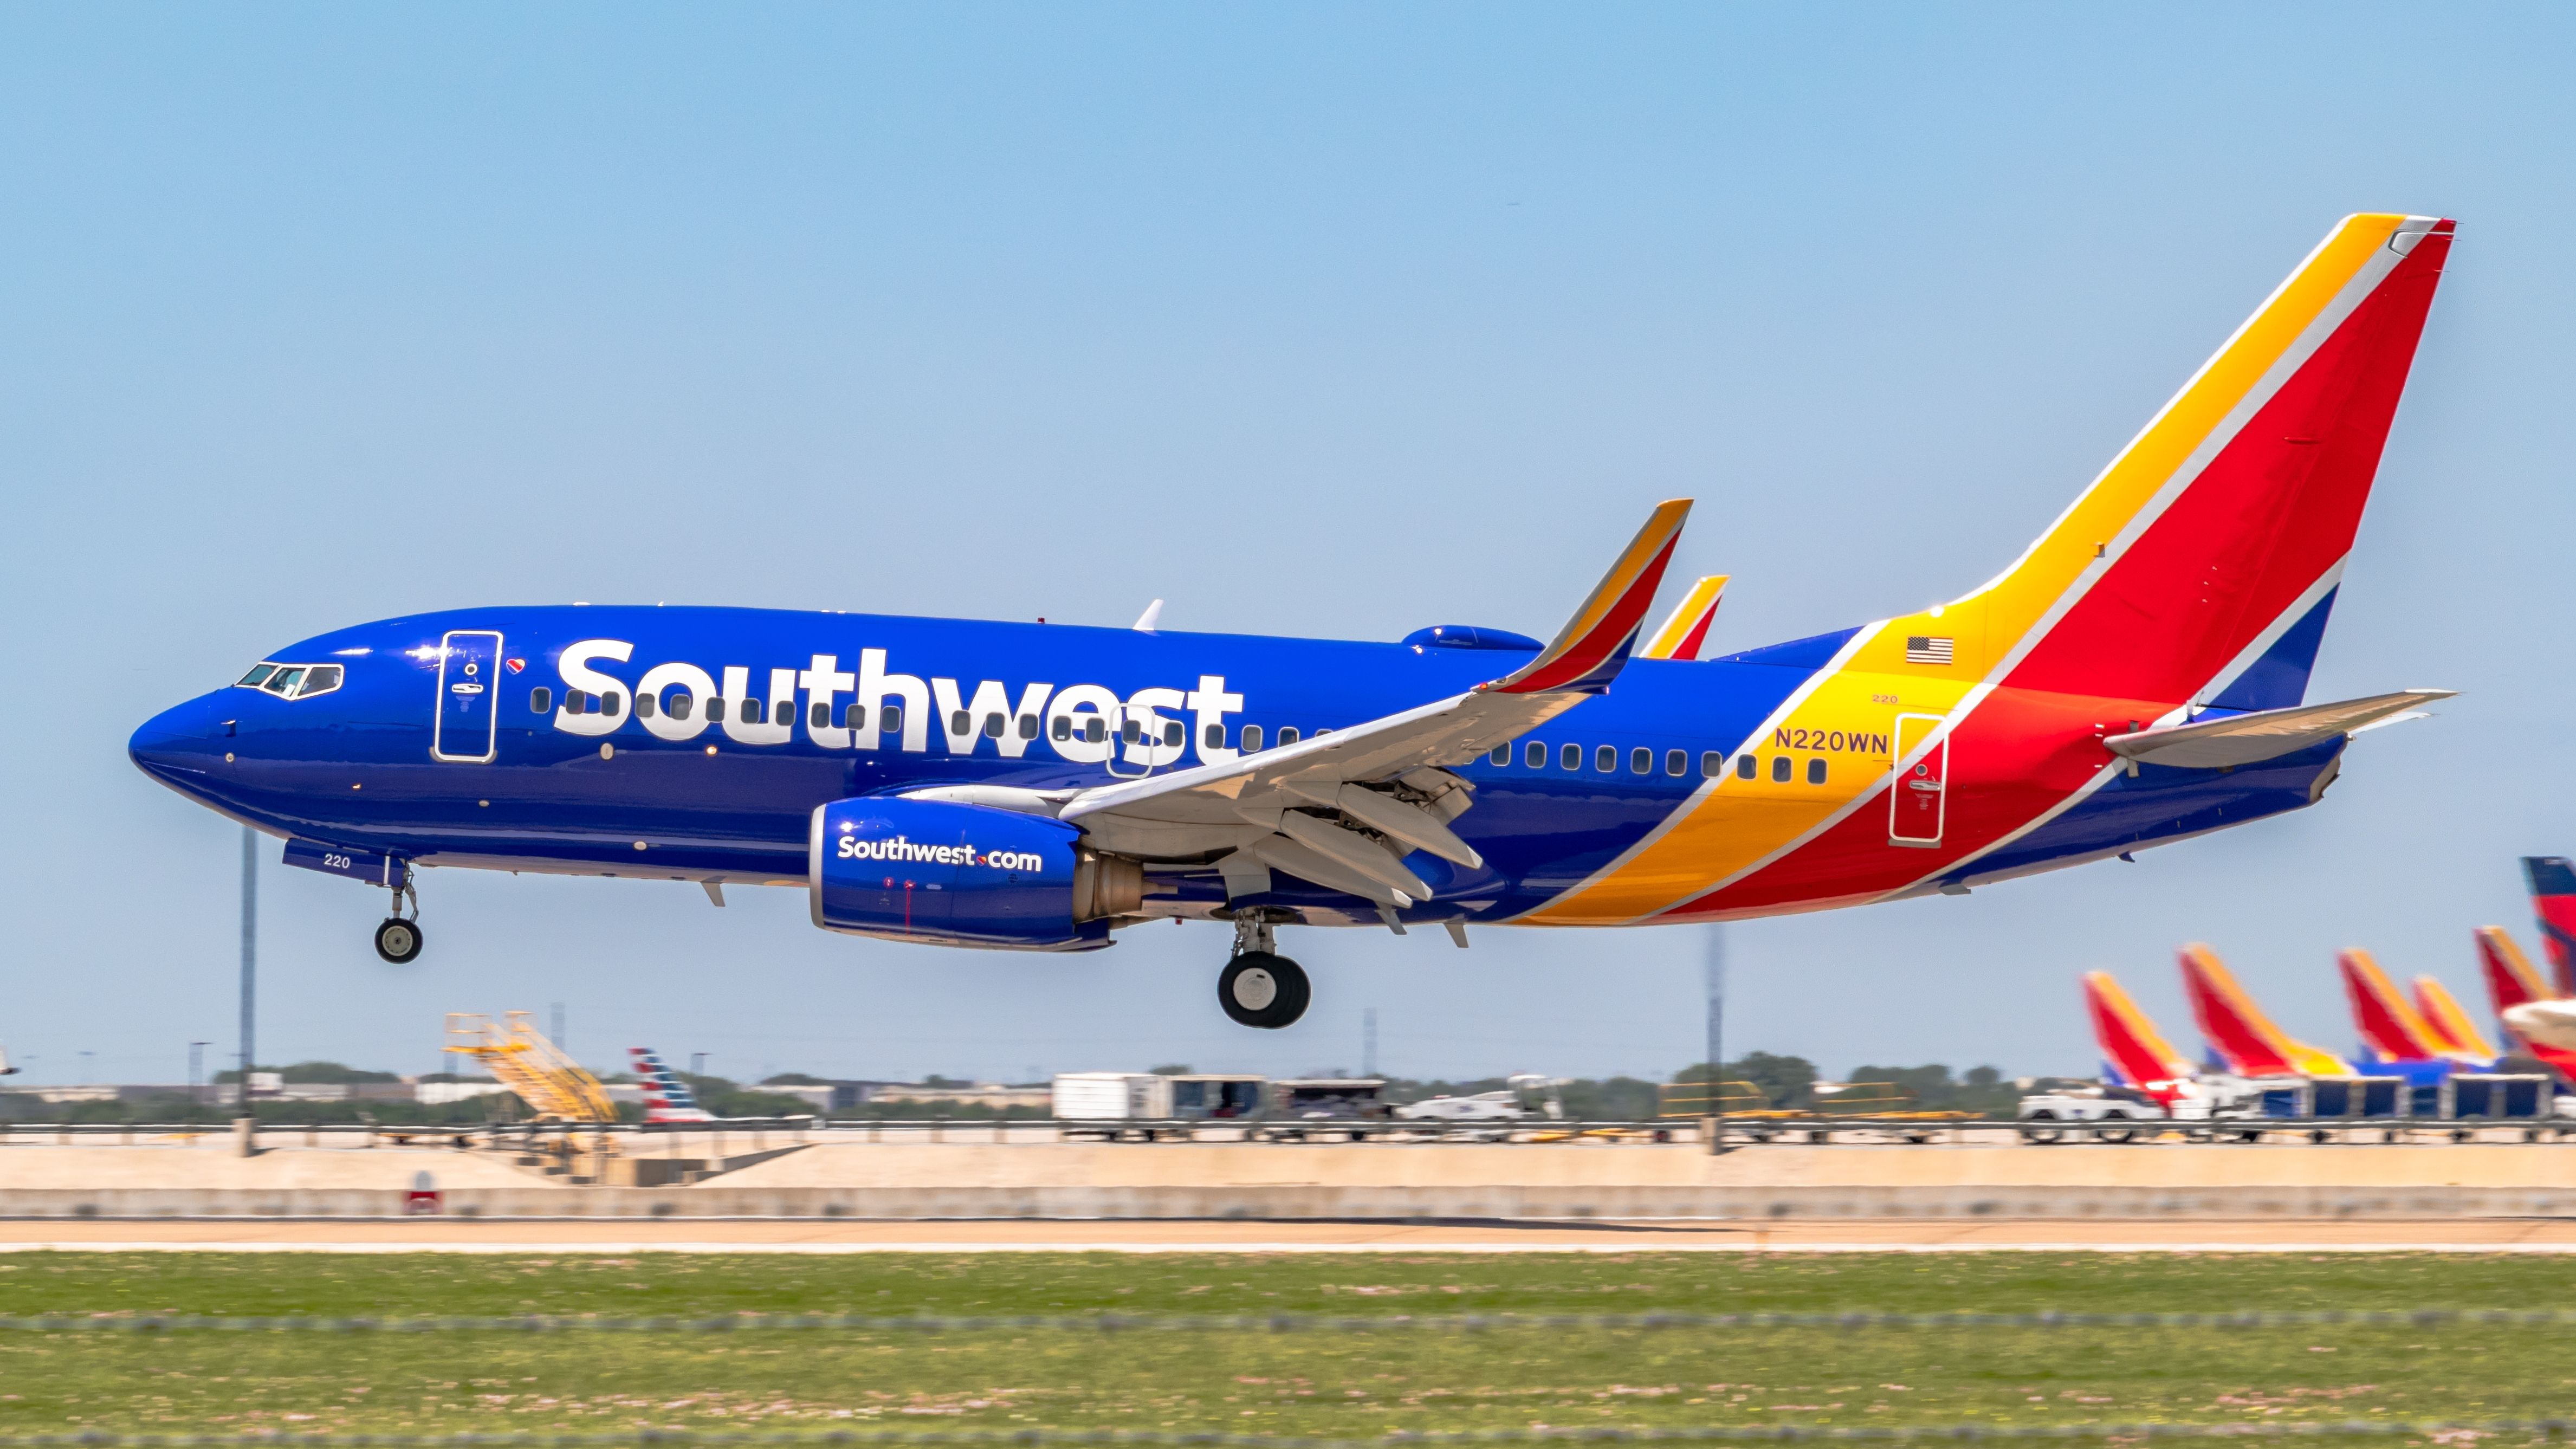 A Southwest Airlines Boeing 737 About to Land.